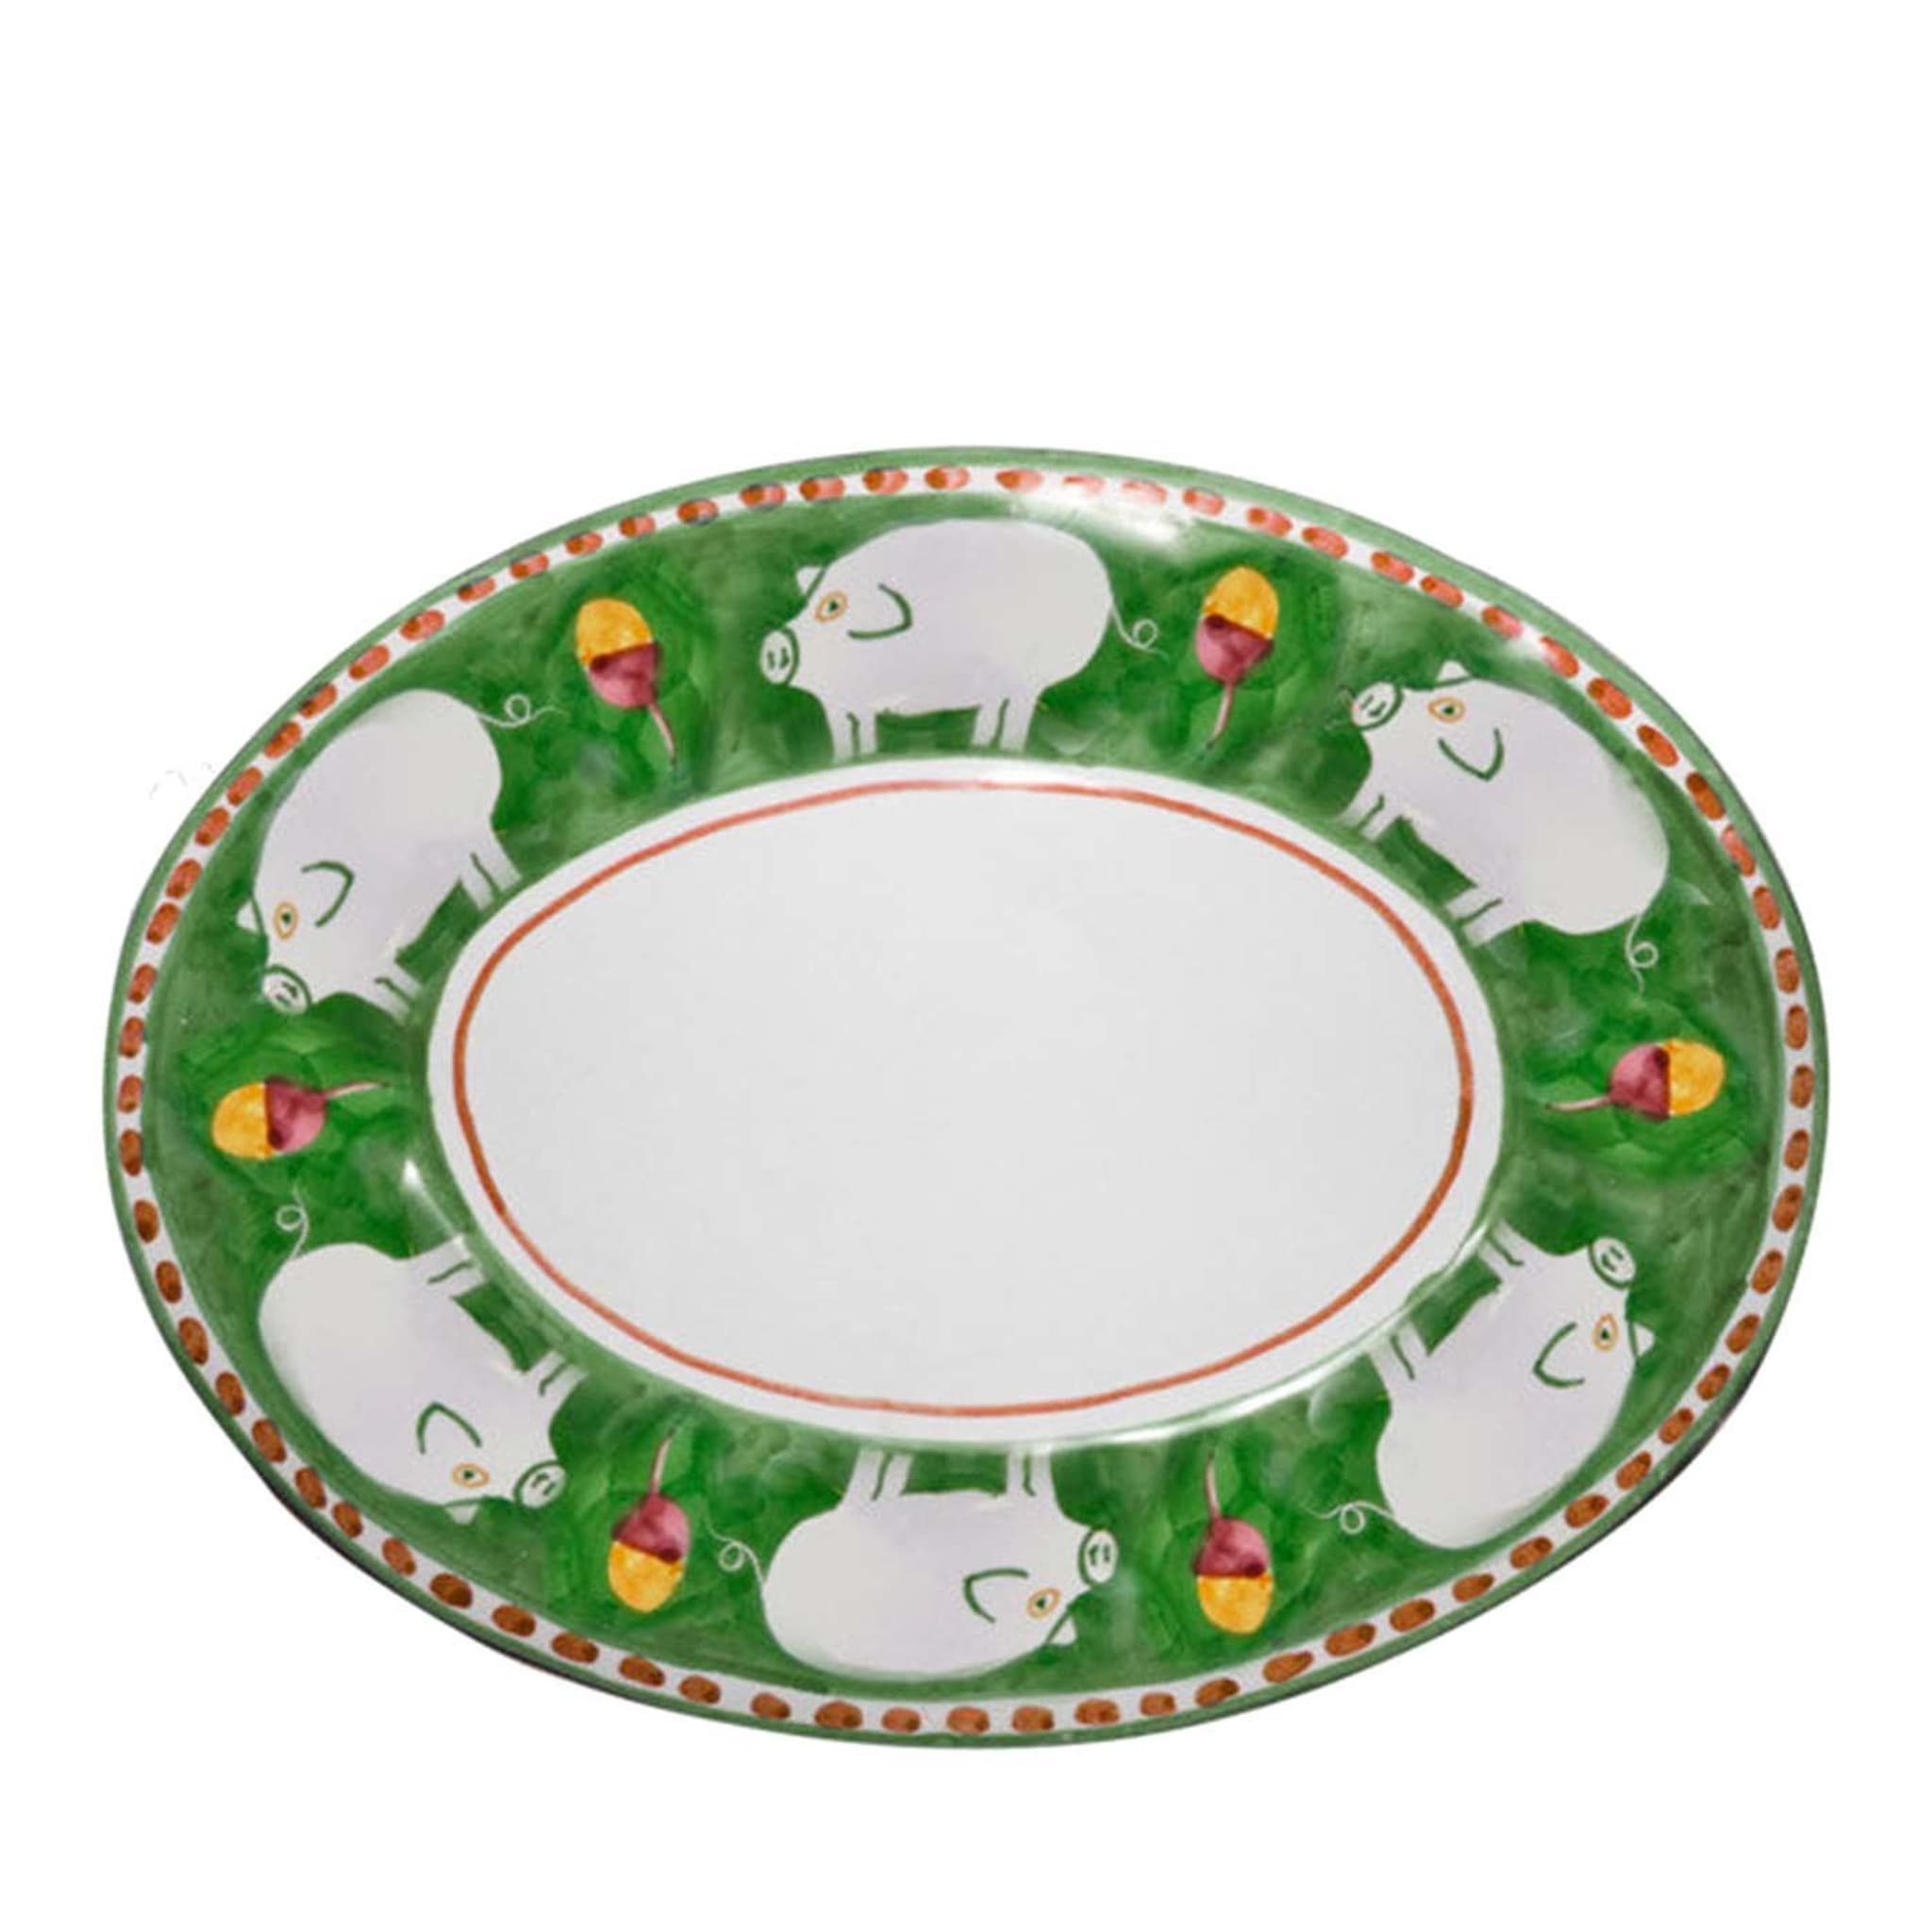 Cortile Oval Green Tray 43cm - Main view